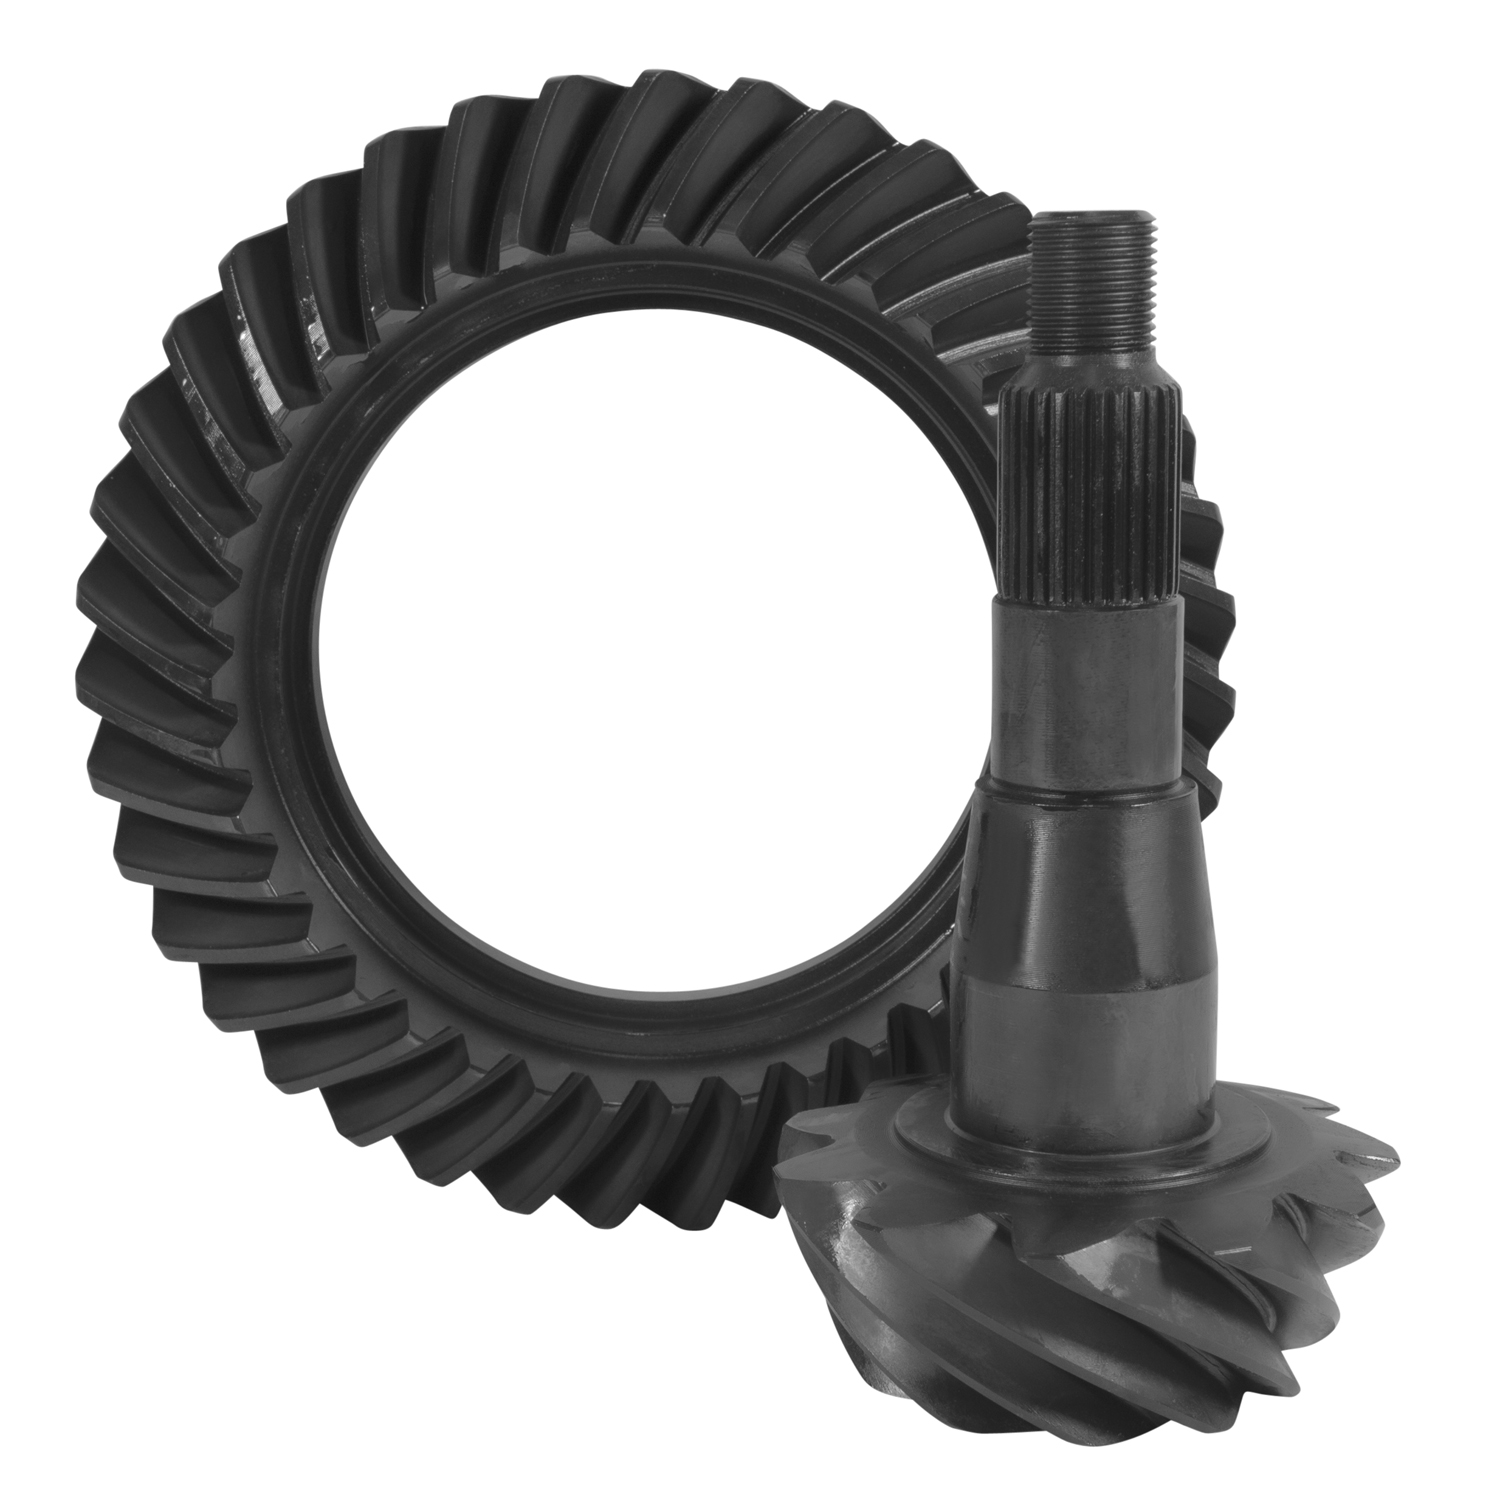 USA Standard Ring & Pinion gear set for '11 & up Chrysler 9.25 ZF, 3.90 ratio